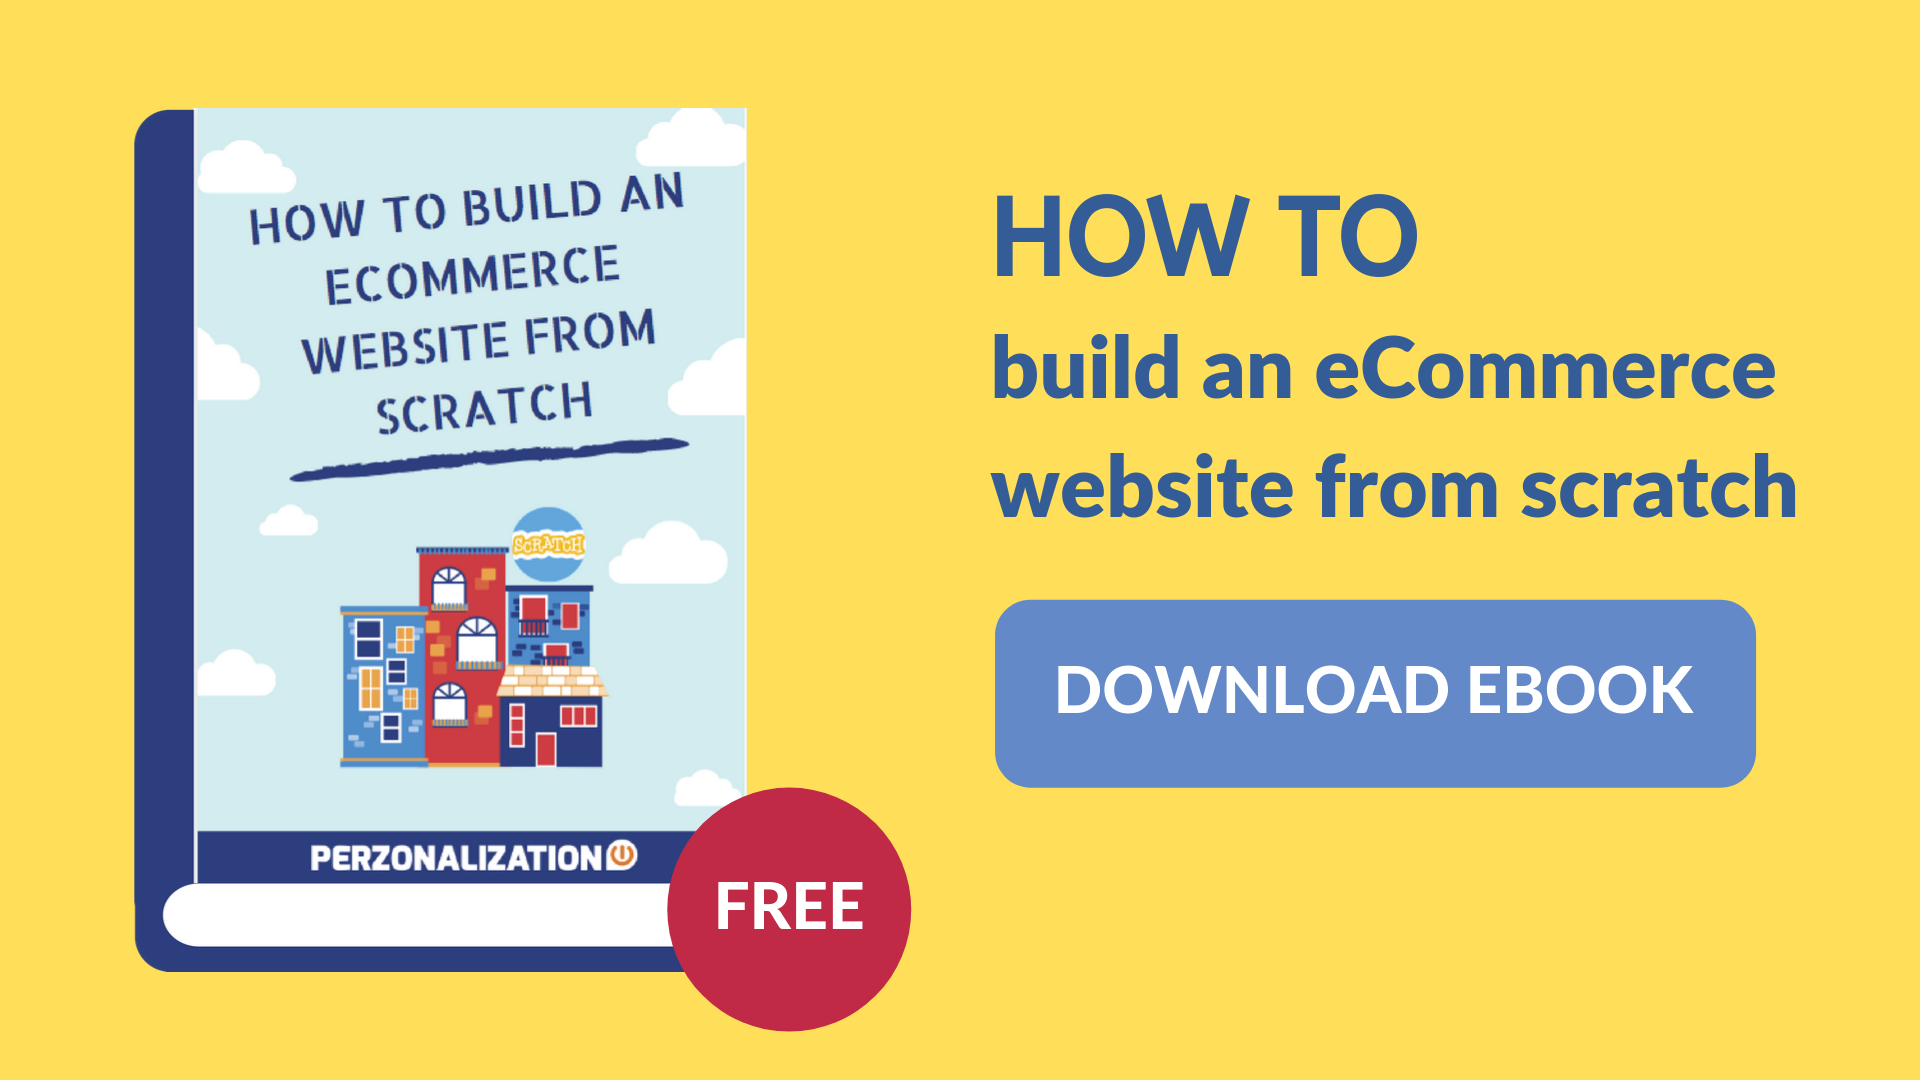 Download free eBook: How to build an eCommerce website from scratch